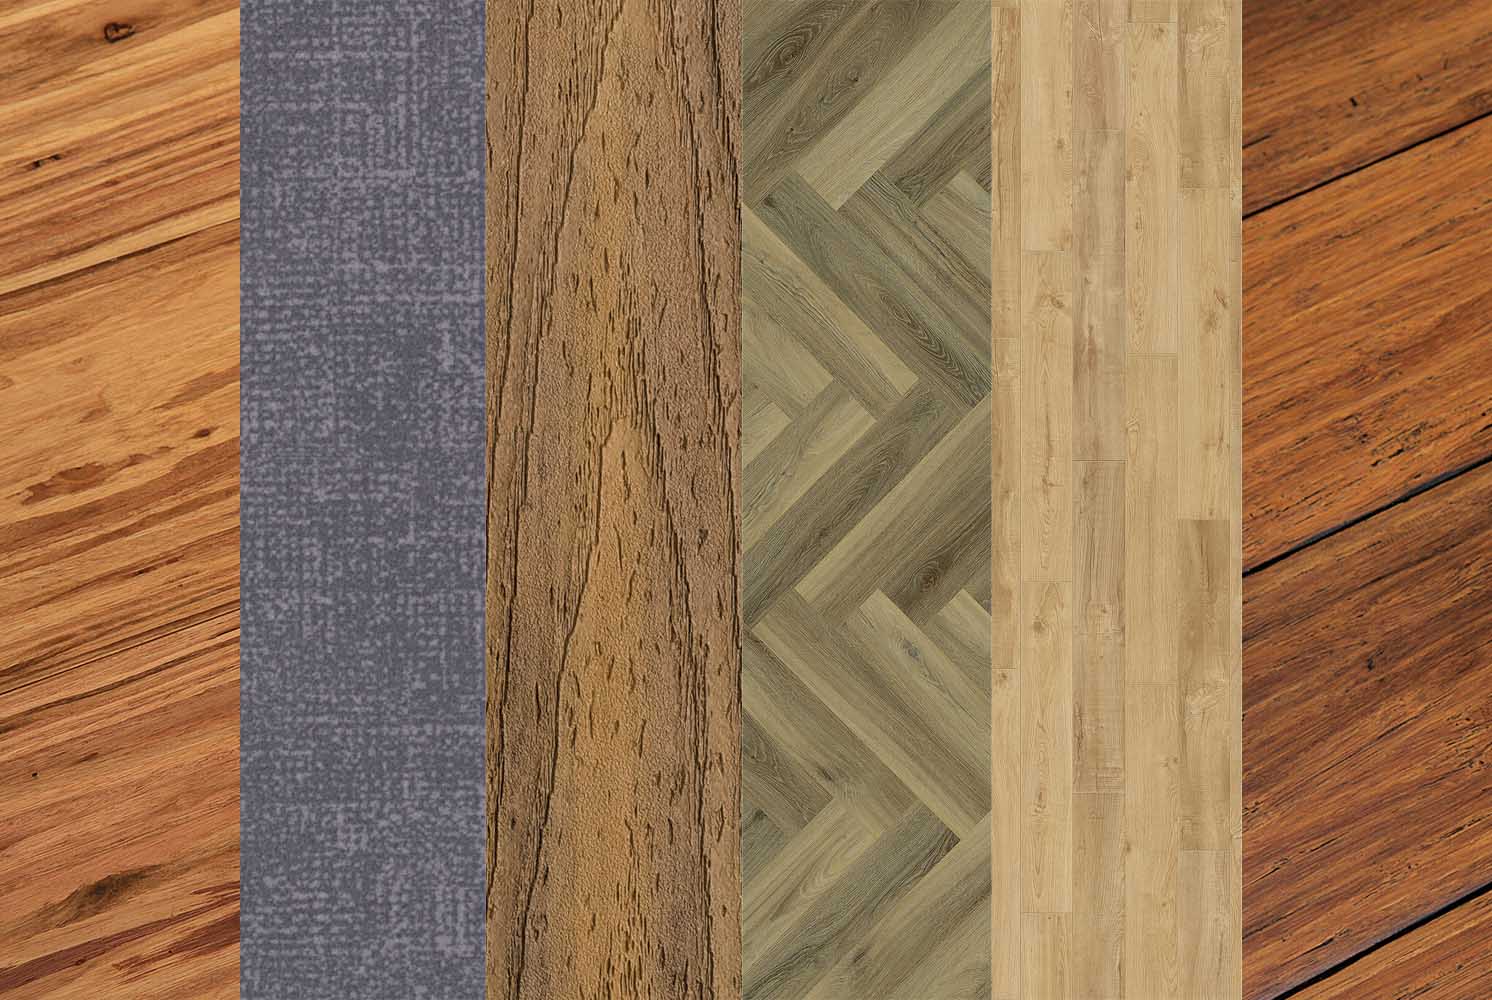 Cork and Bamboo Flooring: Unconventional Yet Stylish Alternatives to Traditional Materials